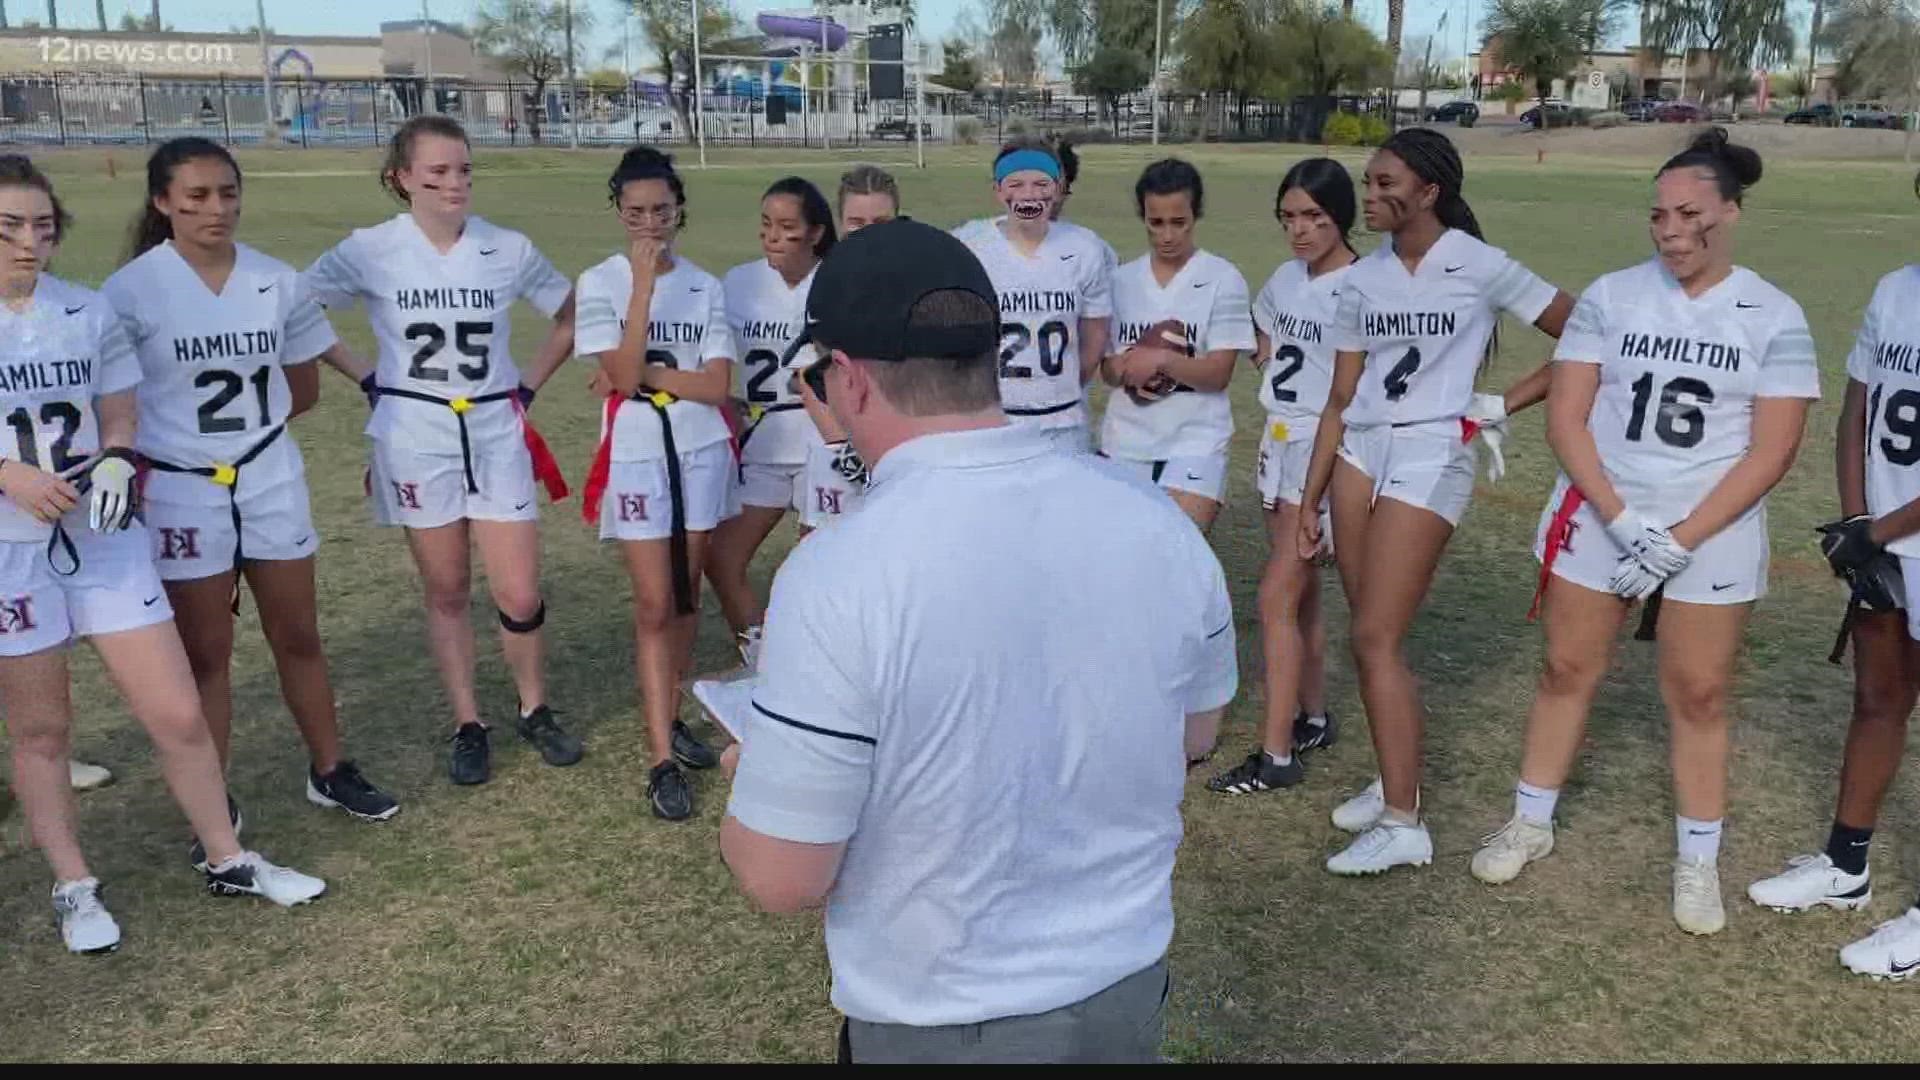 Thursday afternoon in Chandler saw one of many steps toward the goal of major girls’ flag football a varsity sport in Arizona.